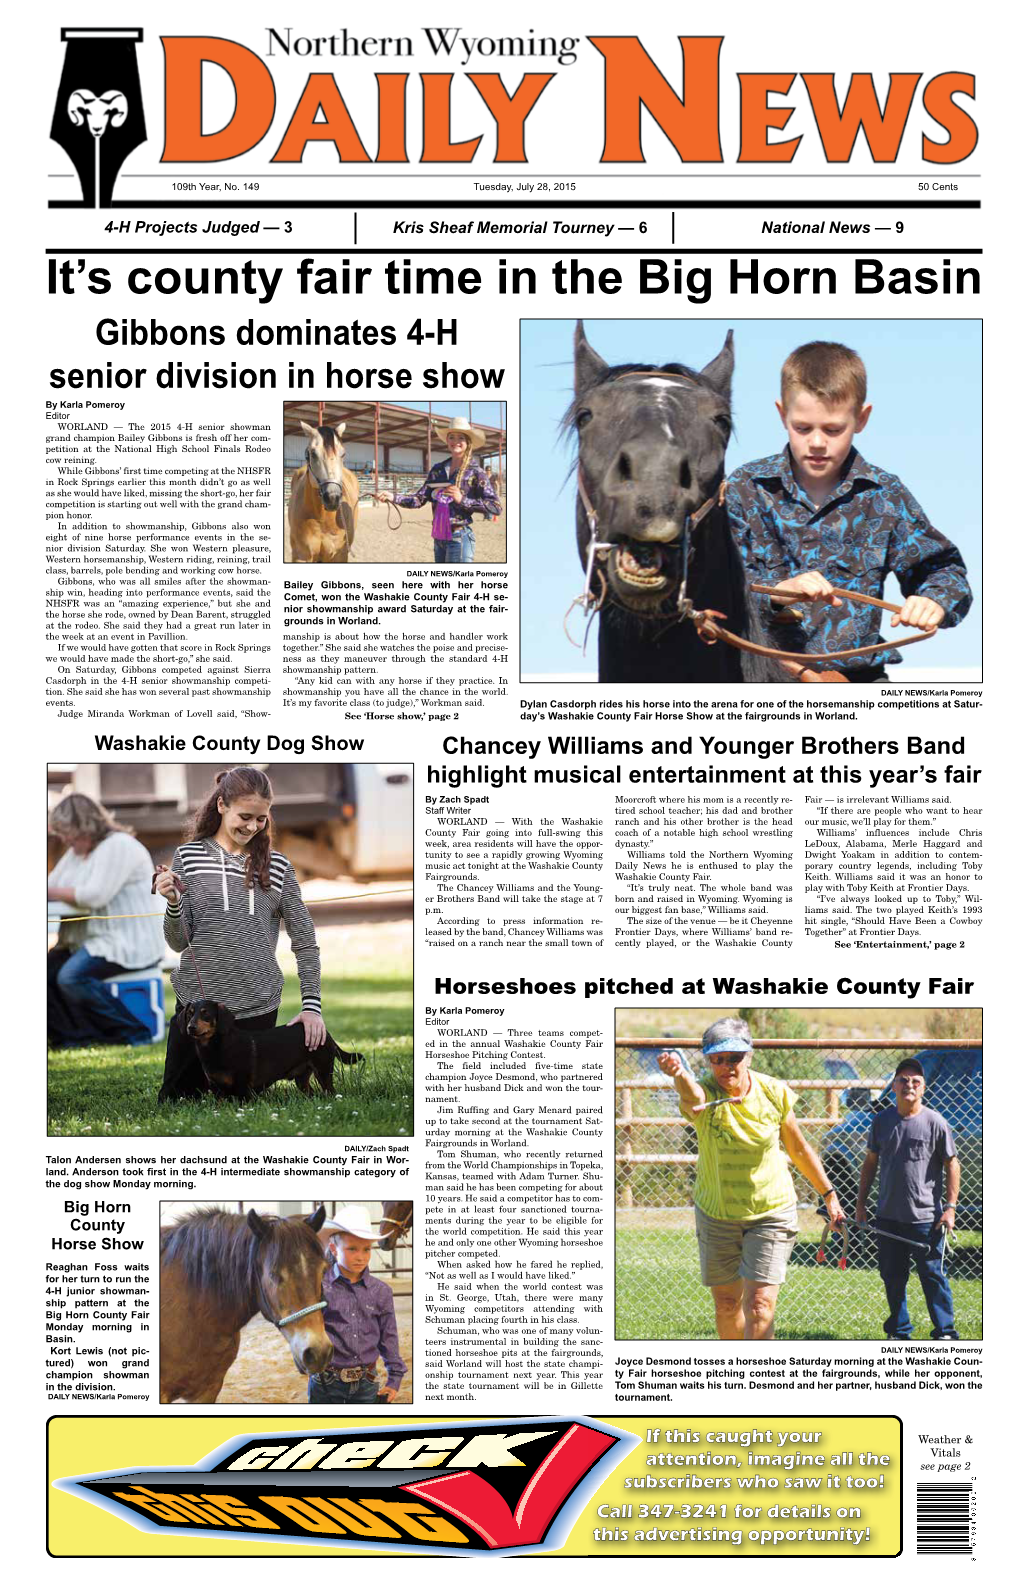 It's County Fair Time in the Big Horn Basin